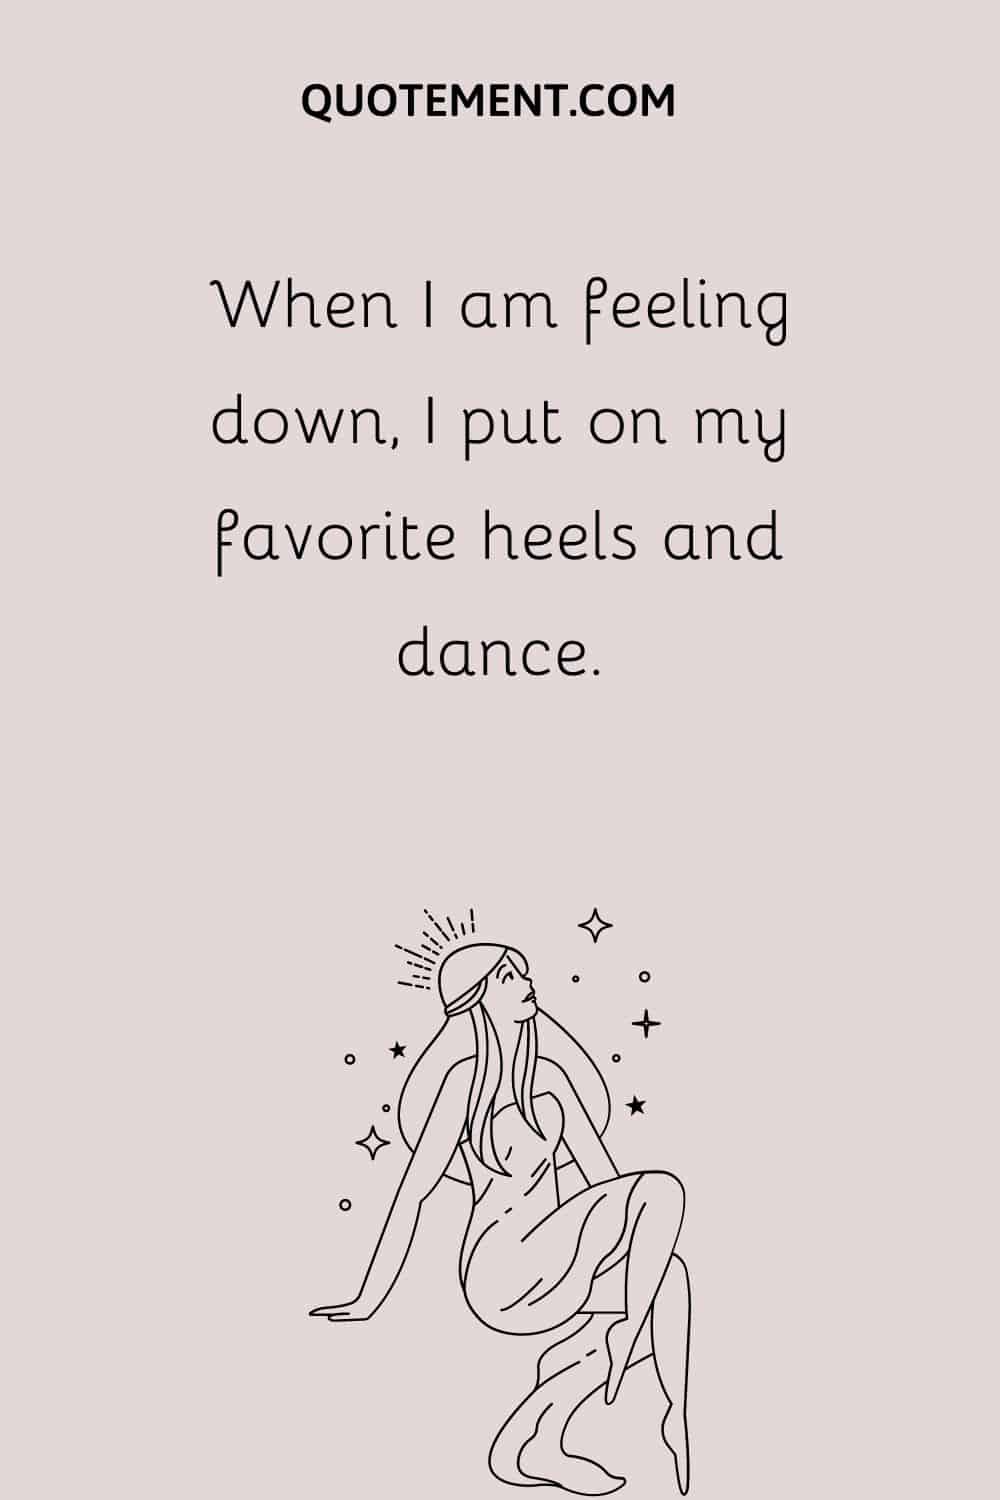 When I am feeling down, I put on my favorite heels and dance.